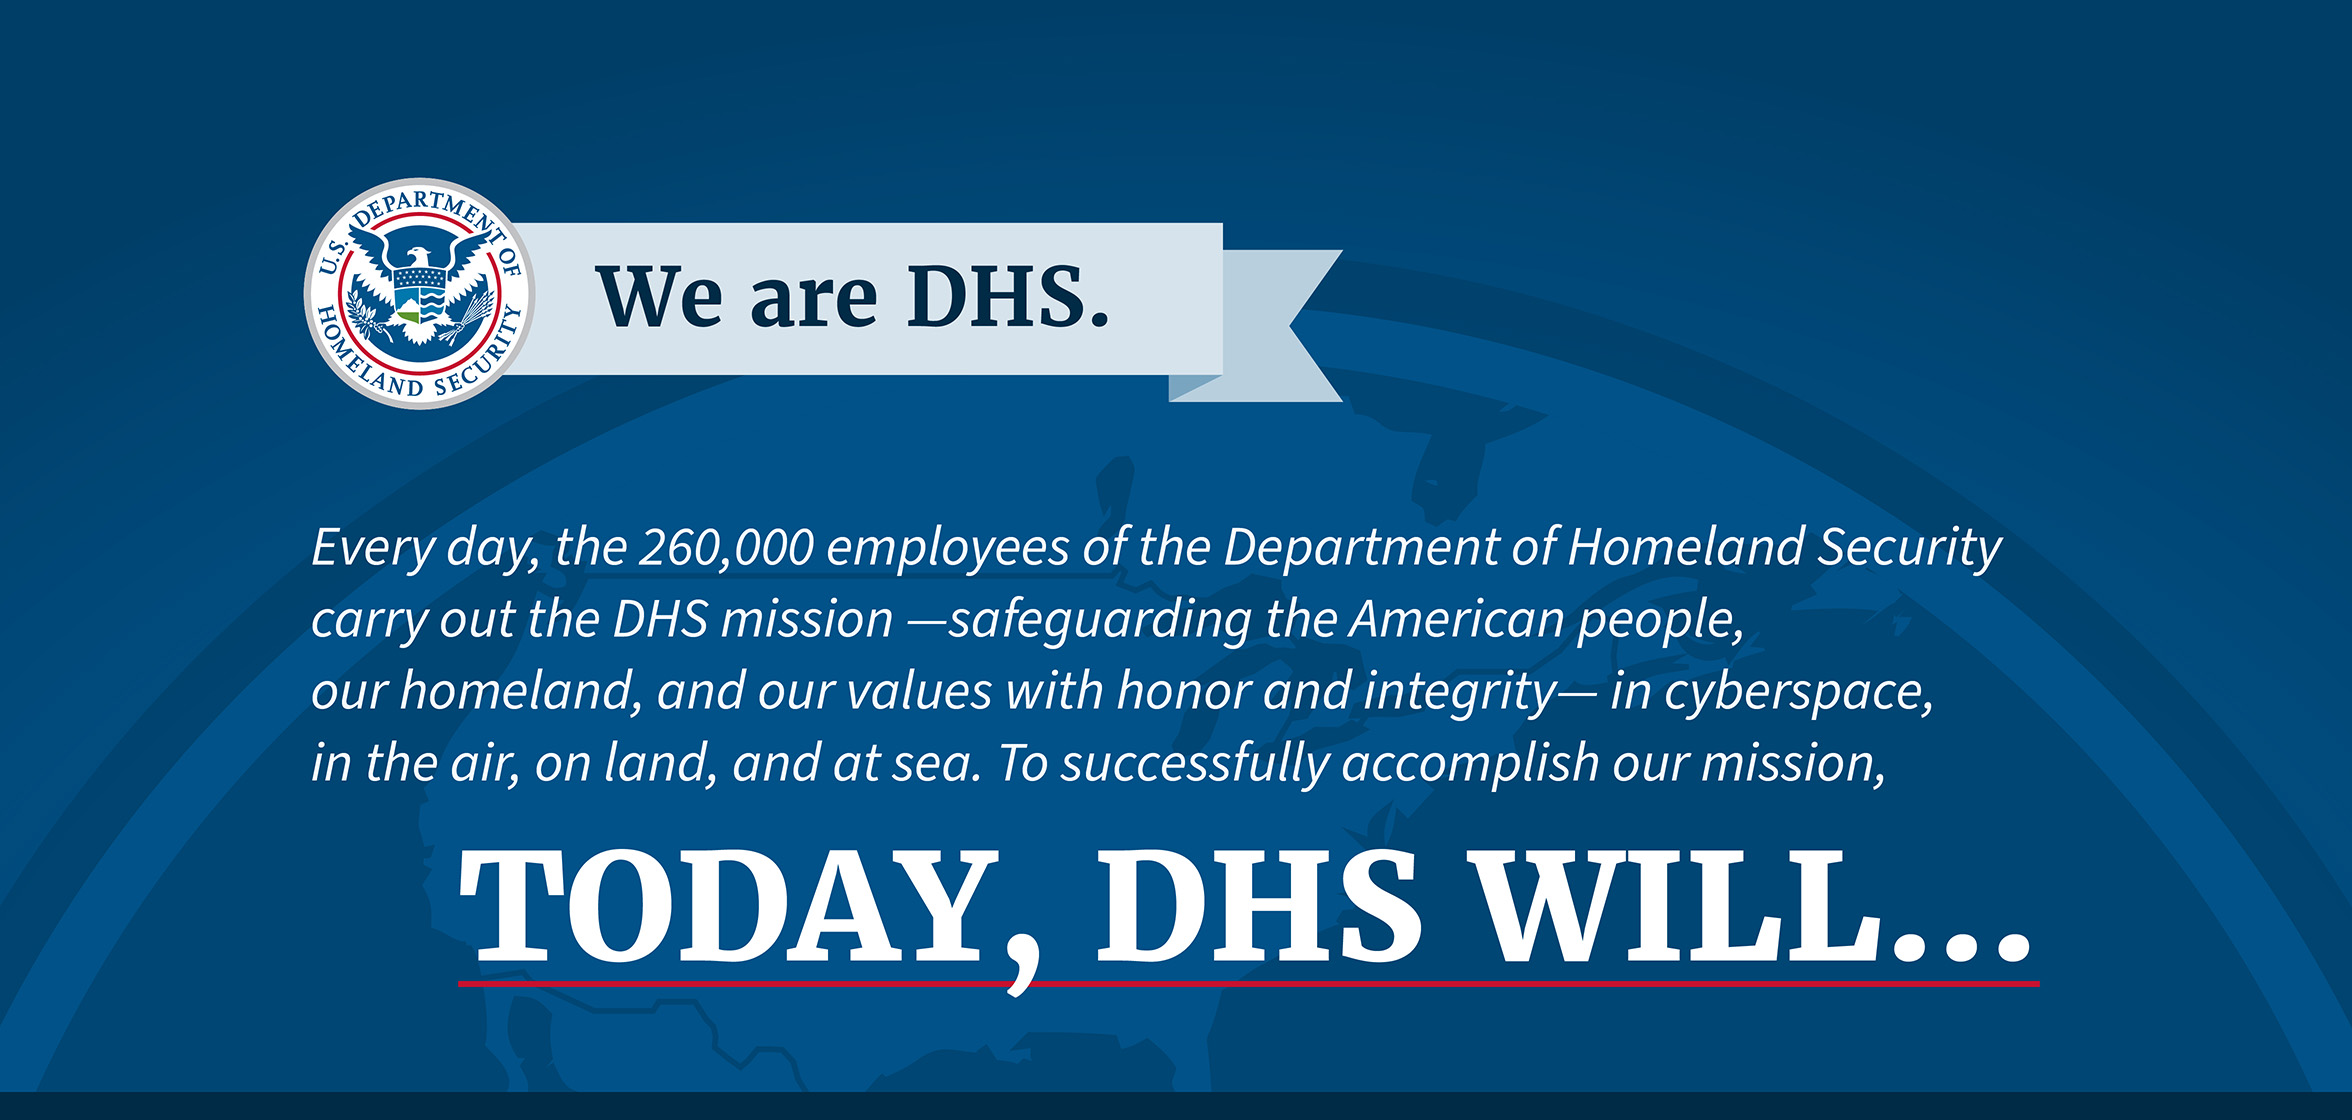  We are DHS. Every day, the 250,000 employees of the Department of Homeland Security carry out the DHS mission —safeguarding the American people, our homeland, and our values with honor and integrity— in cyberspace, in the air, on land, and at sea. In order to fulfill our mission, Today, DHS will...